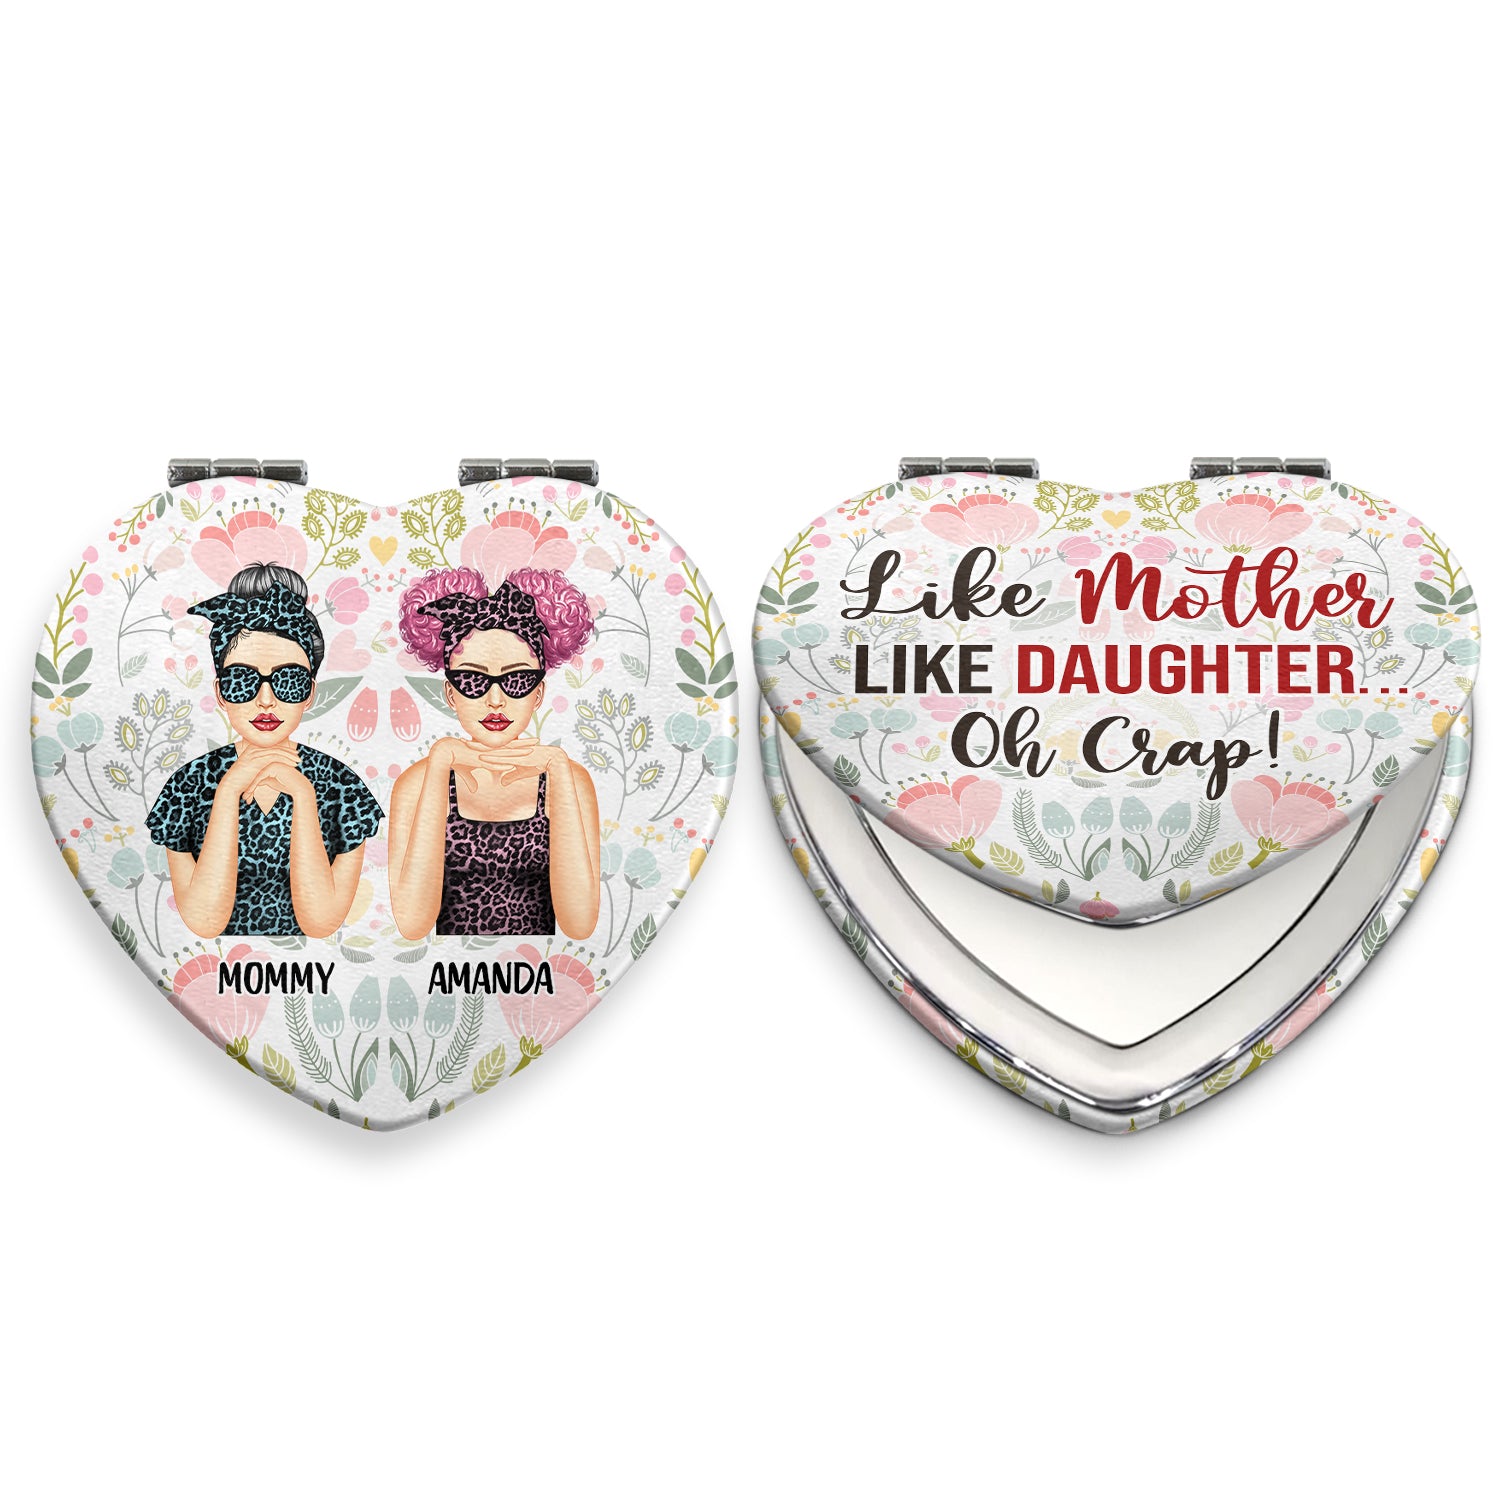 Like Mother Like Daughter - Gift For Mother Daughter - Personalized Heart Shaped Compact Mirror